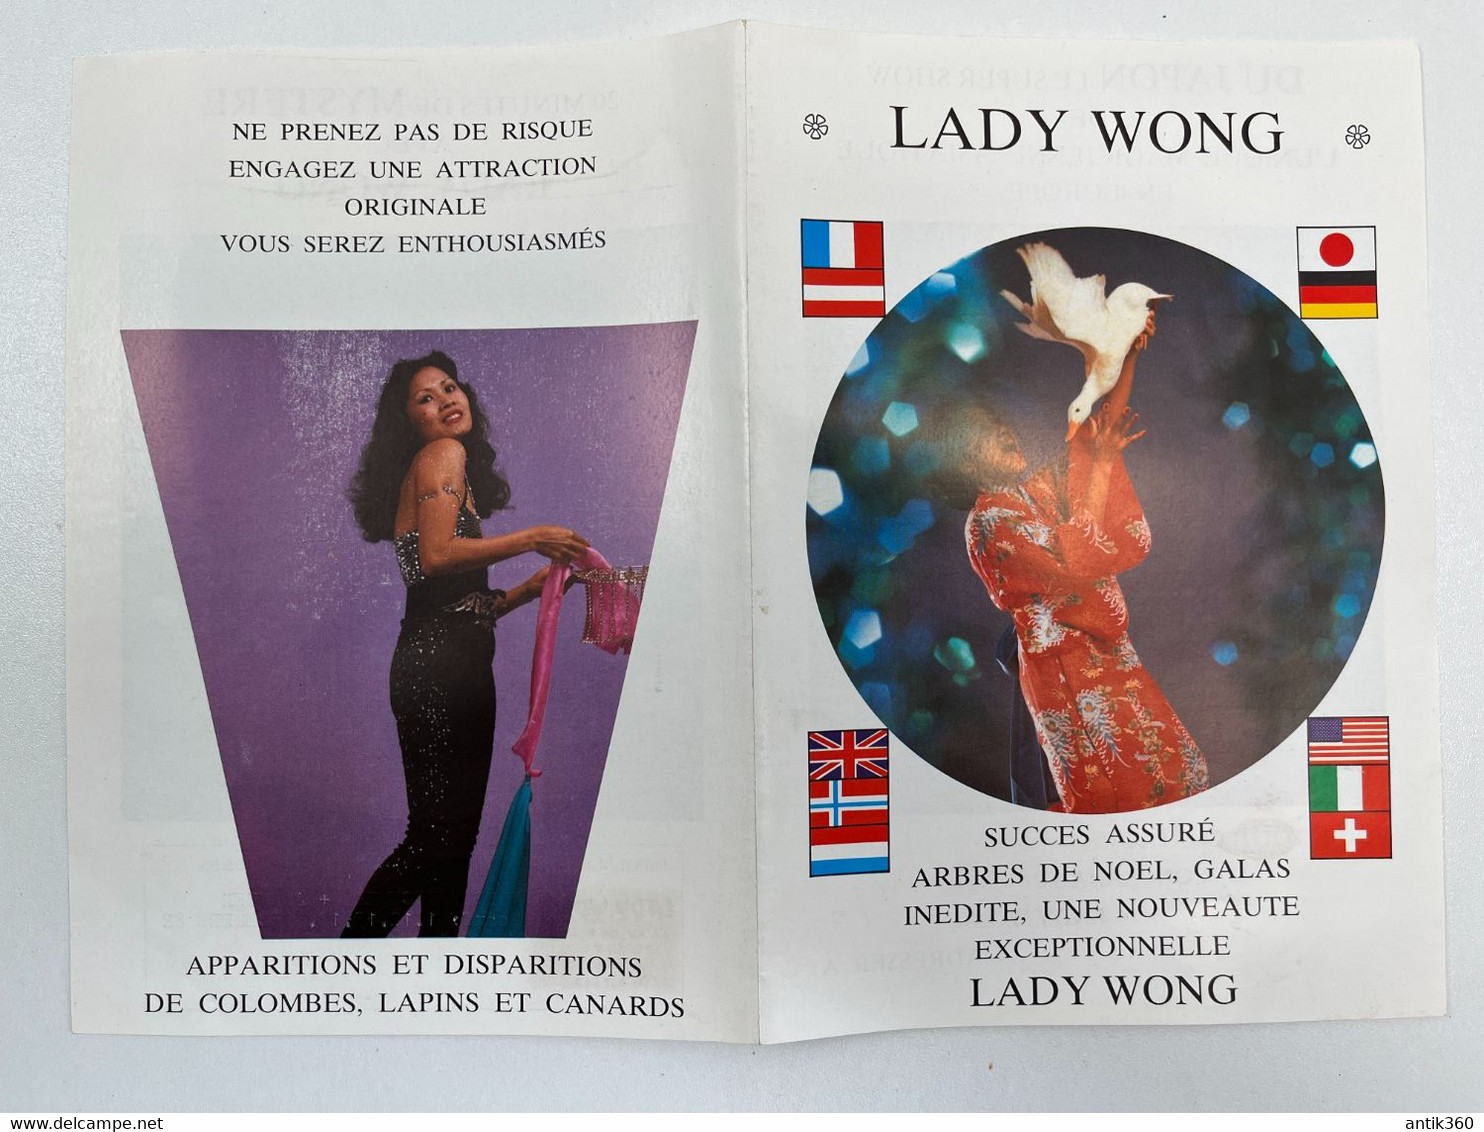 Cirque - Brochure Spectacle Magicienne LADY WONG Magie - Programmes